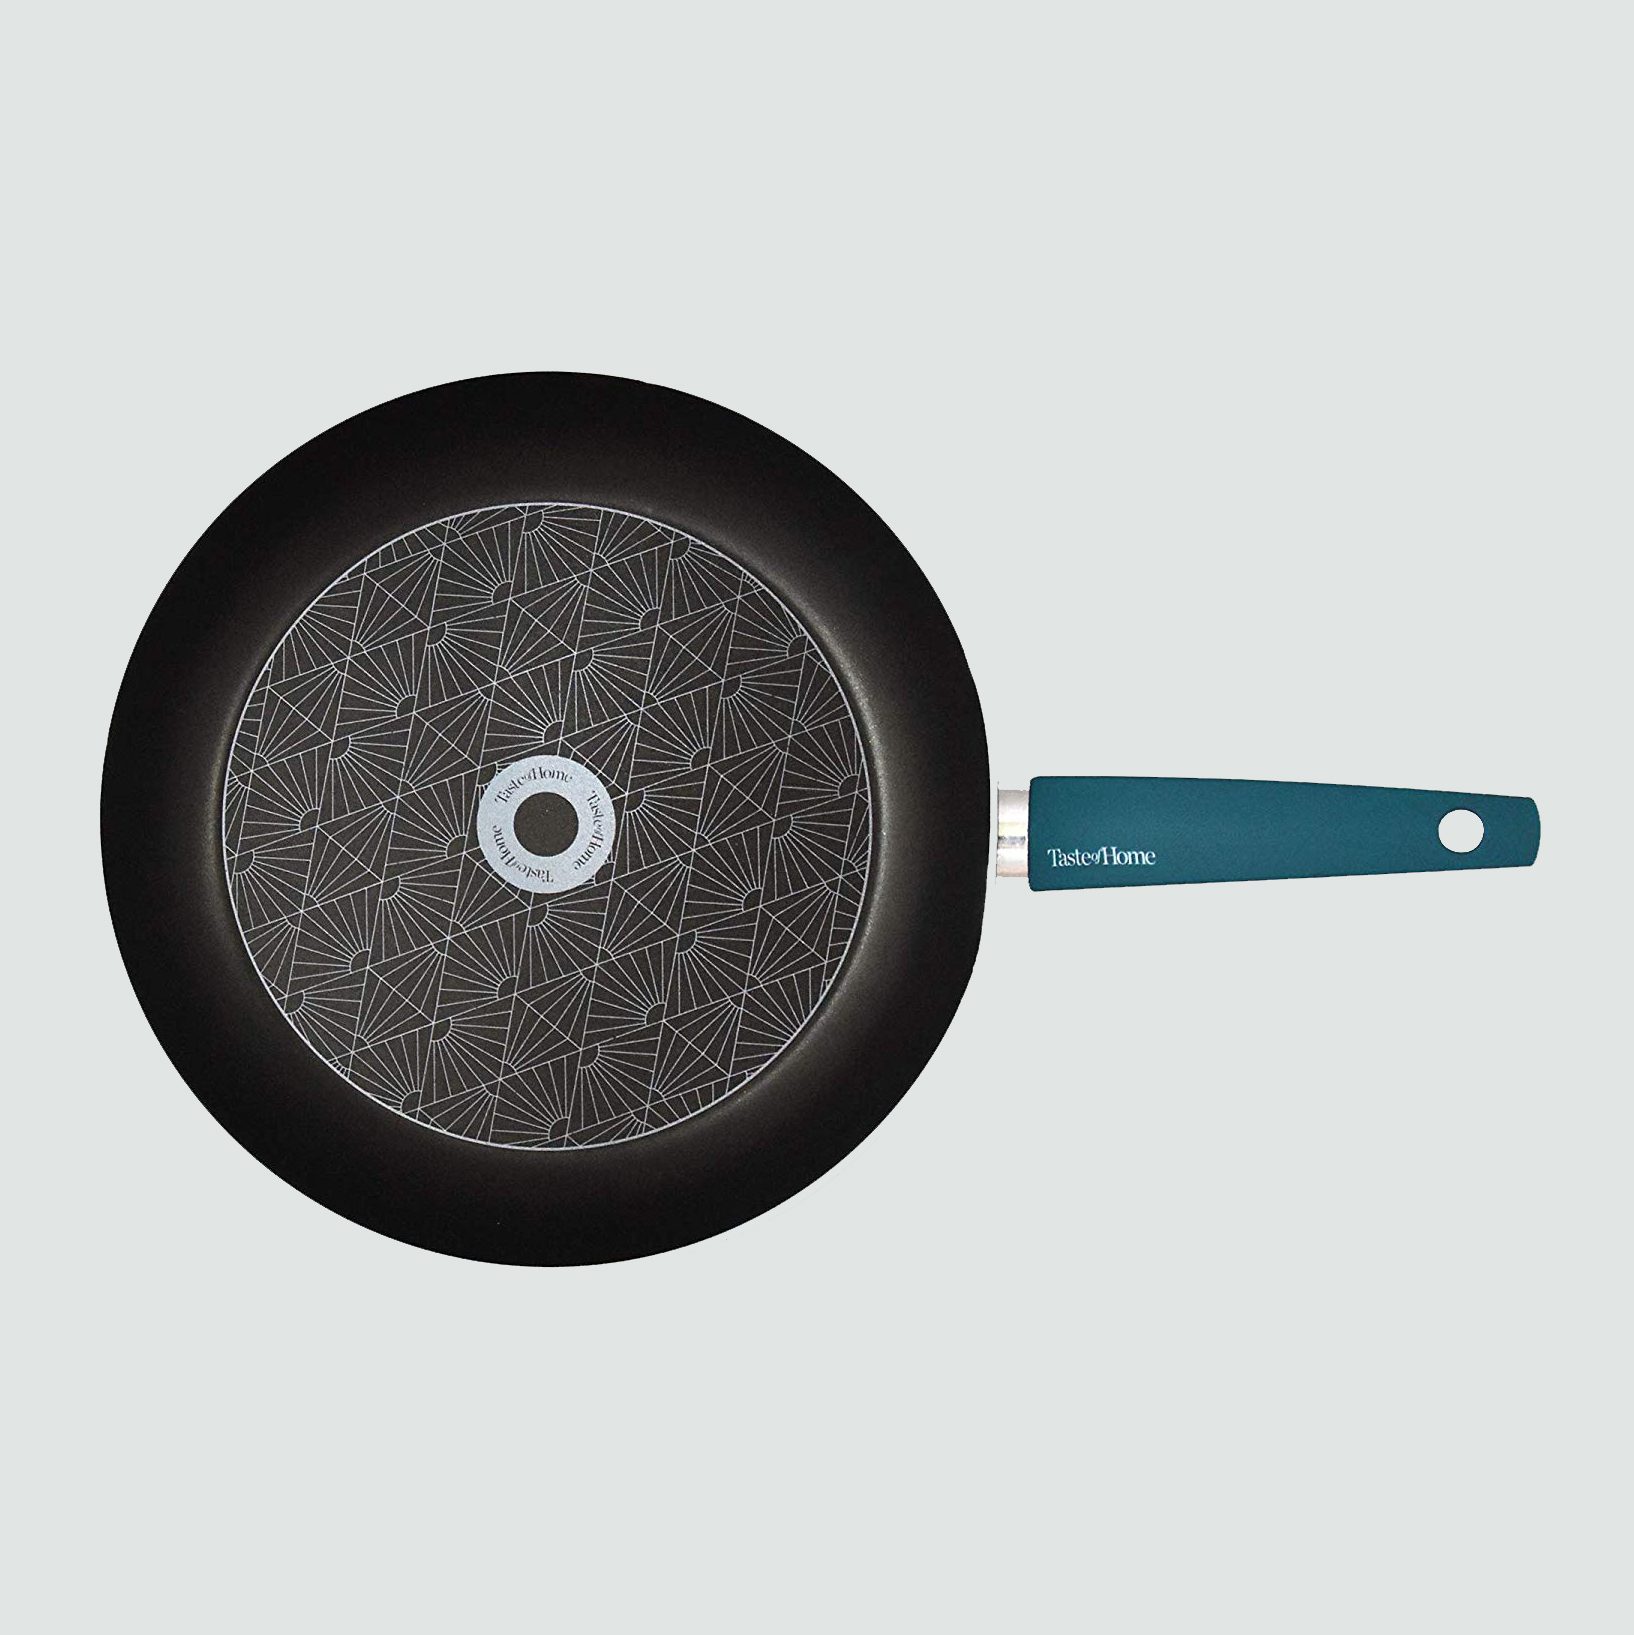 The Best Frying Pan for You and Your Cooking Style